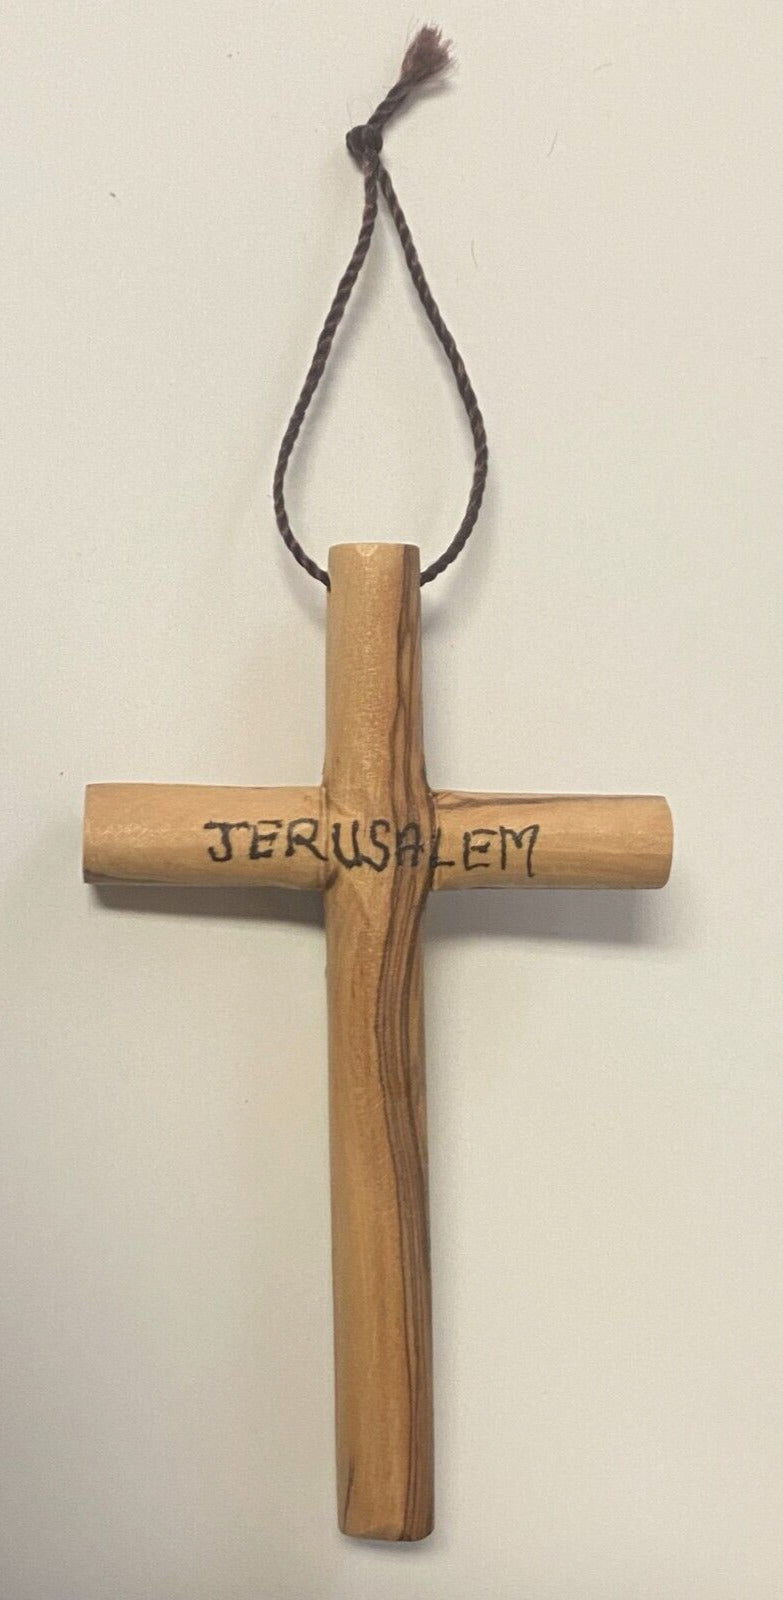 Round Olive Wood Cross 4.7/8" New from Jerusalem